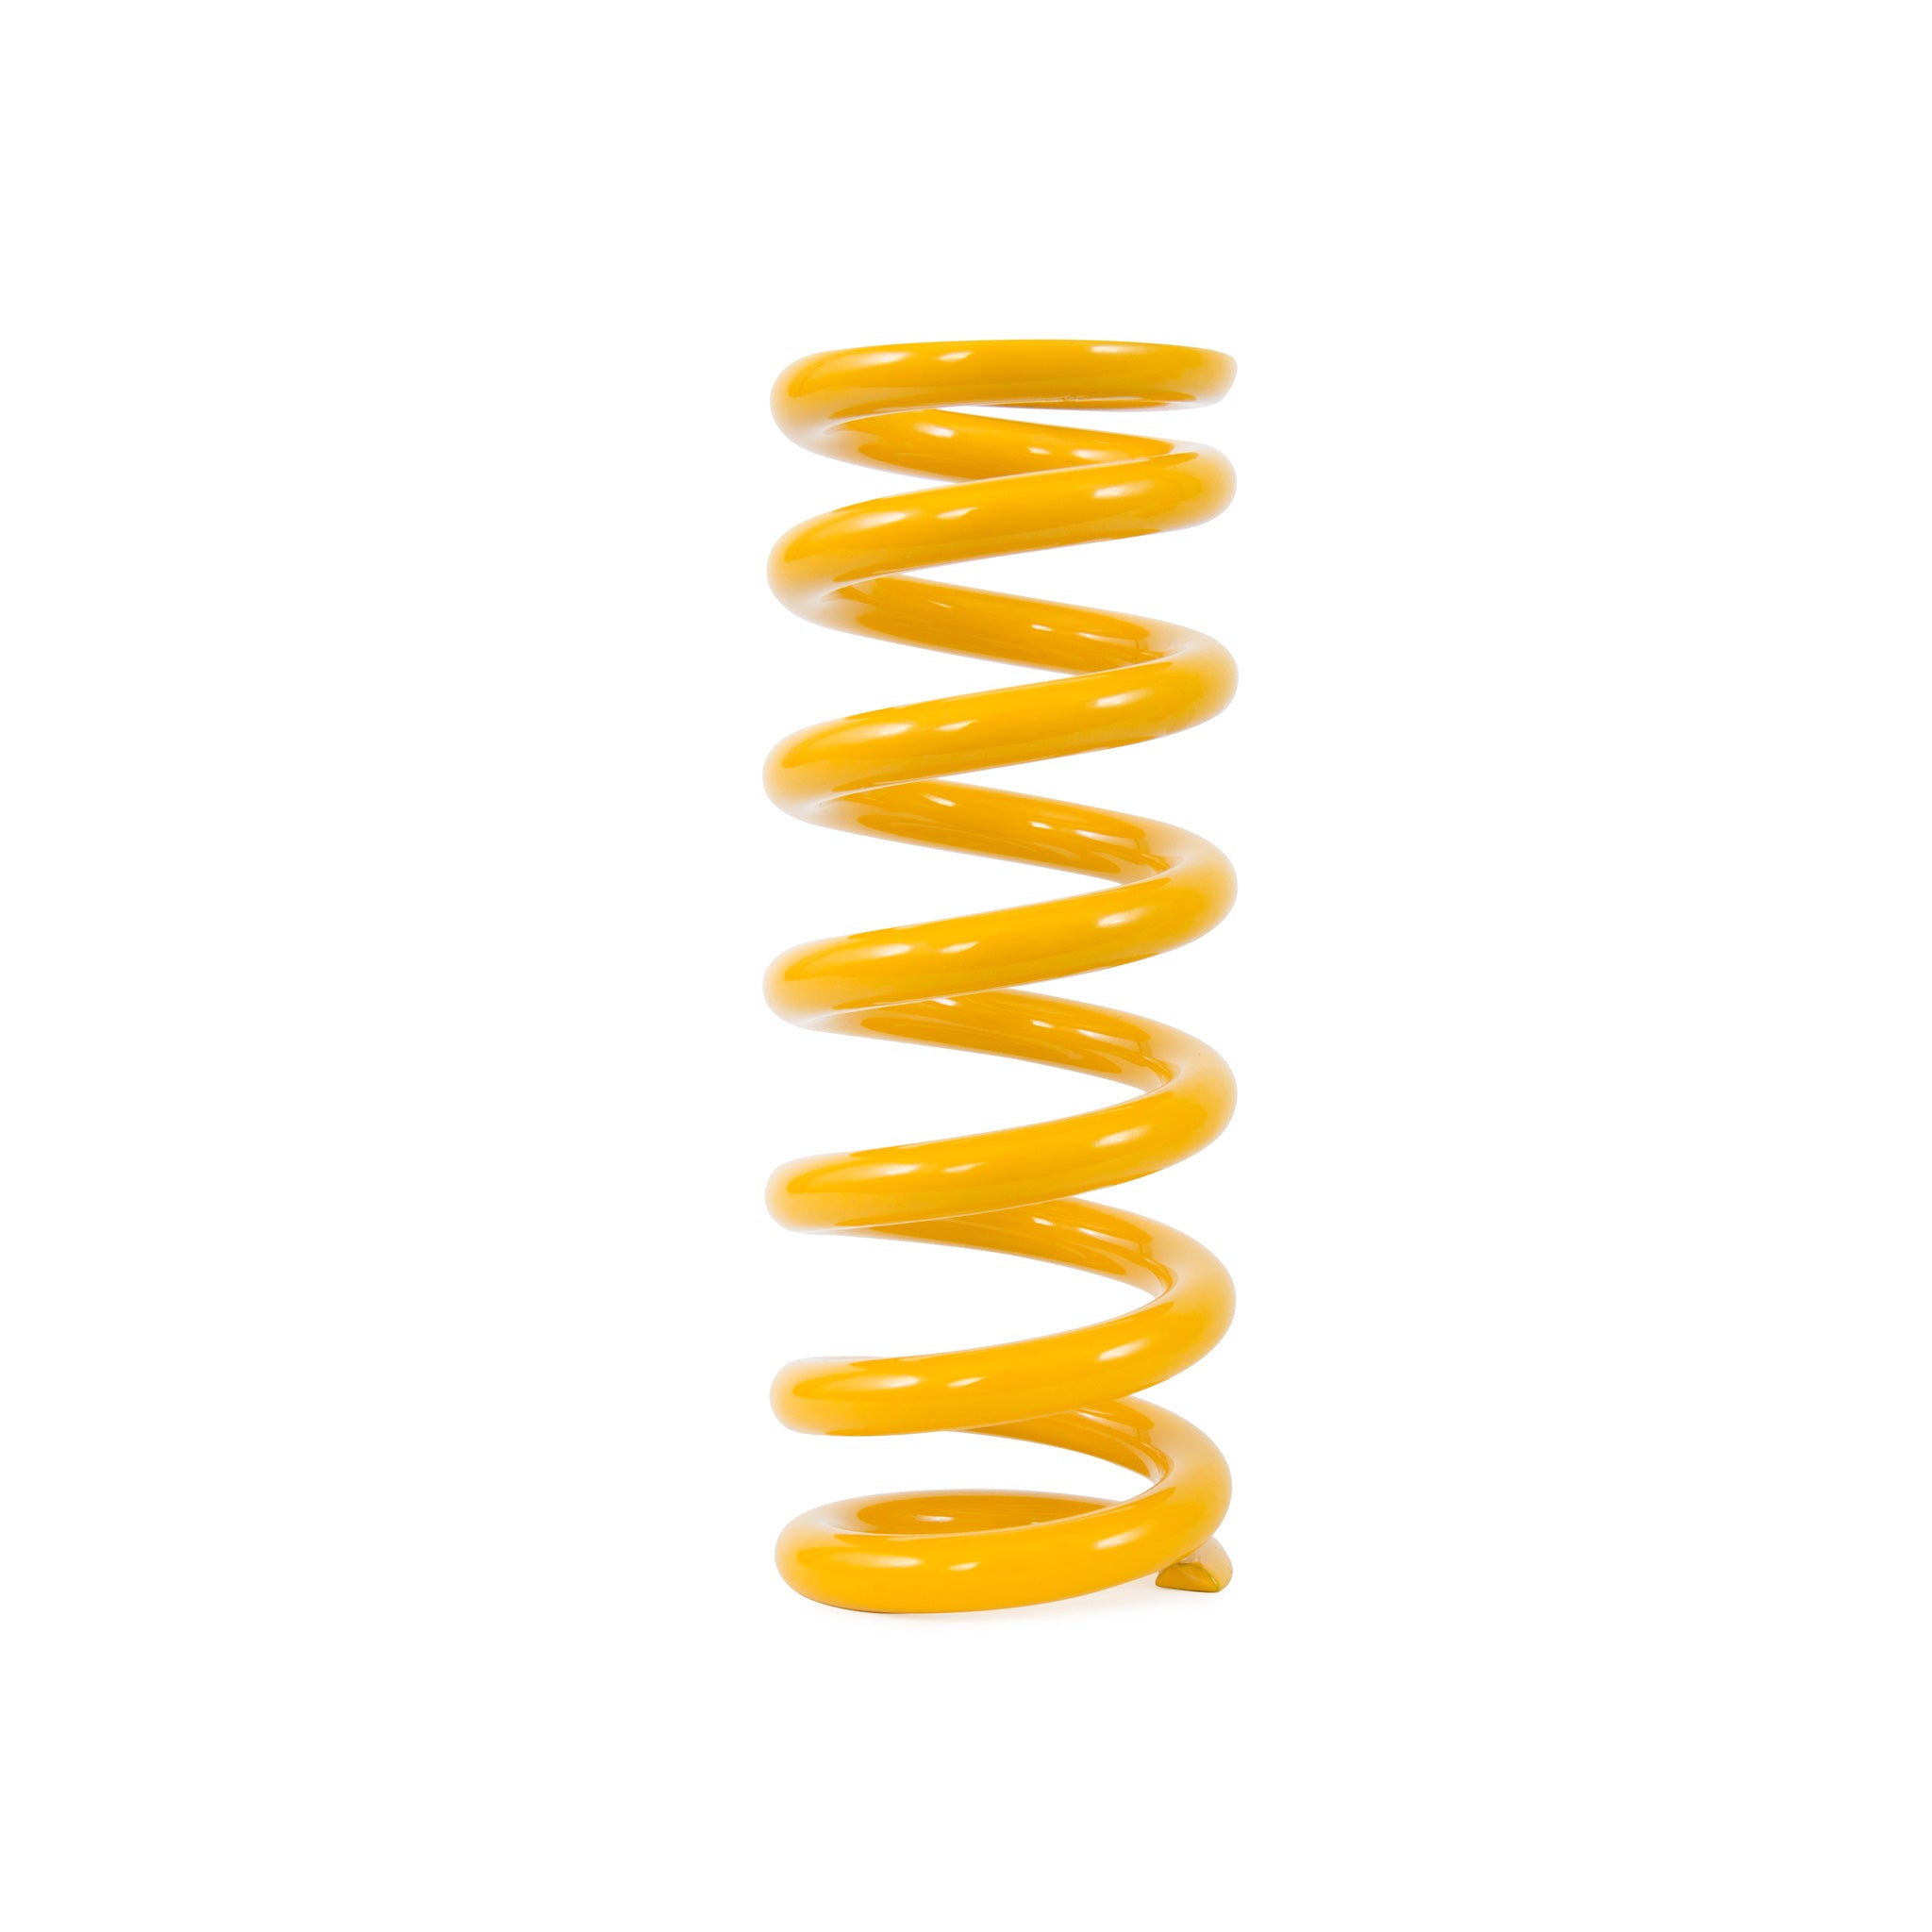 Ohlins Spring 89mm S x 388 lbs/in